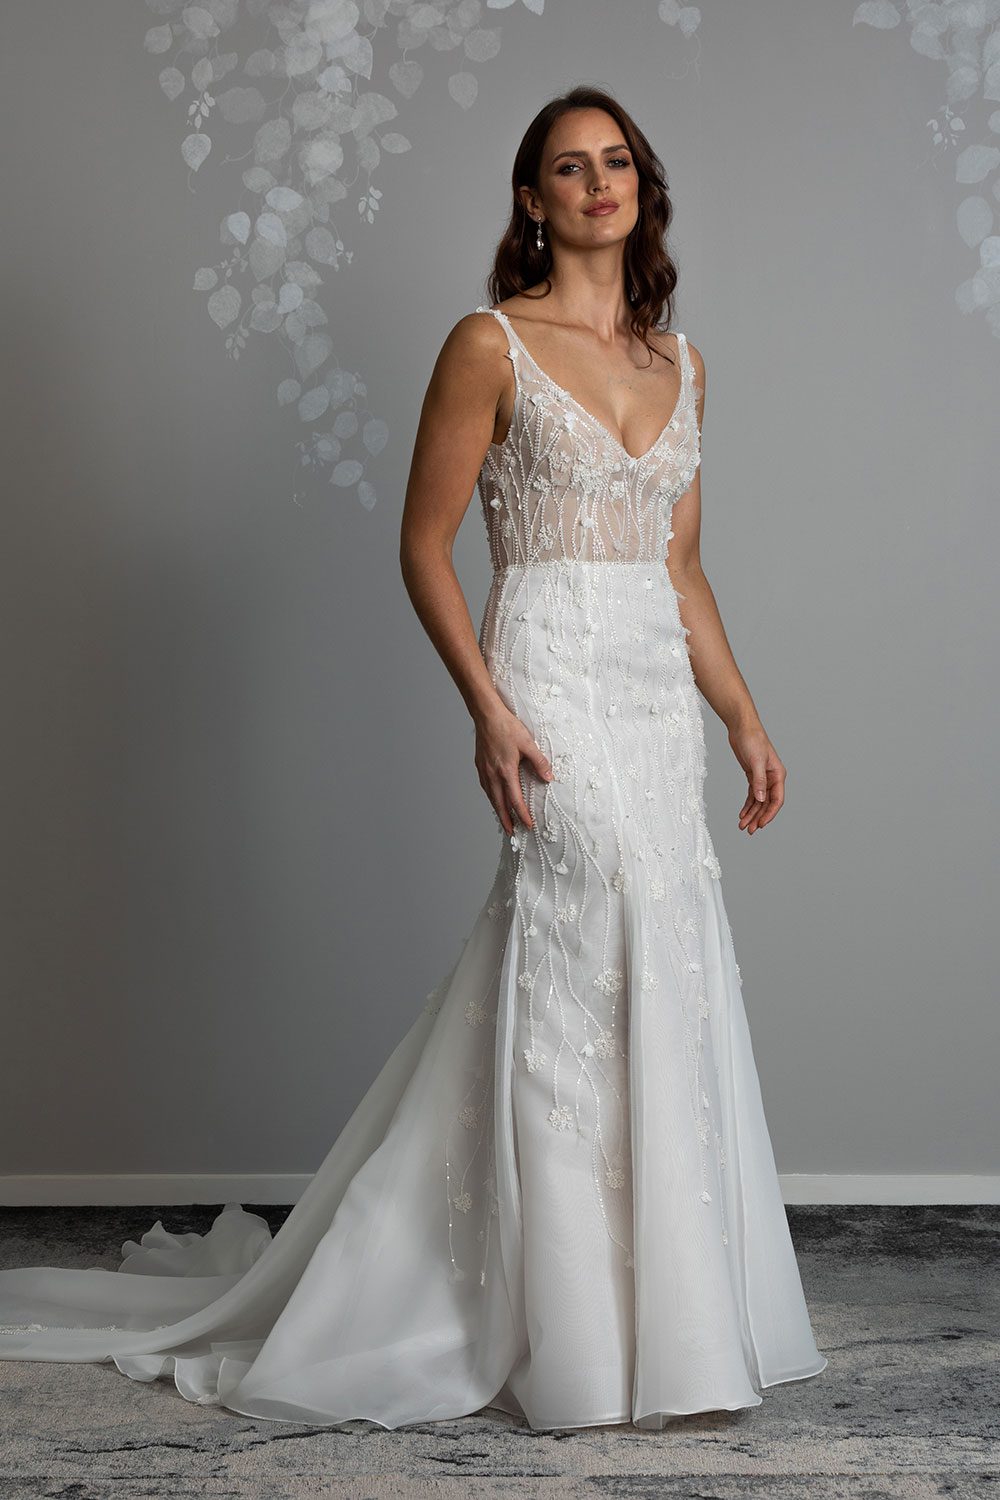 Bronte Wedding Dress by Vinka Design - Featuring a form sculpting mermaid silhouette that embraces the wearer's curves, and intricately embroidered, beaded, botanical lace that trails seamlessly from the bodice into the skirt. Crafted on a semi-sheer base, the bodice boasts a V-neckline and beautiful low V-back. Artfully constructed with layers of dreamy, yet dramatic silk organza and soft tulle, added flare and fullness is achieved through the skirt which fans into a sweeping opulent train. Full length view of model wearing V-neckline bodice with intricately embroidered beaded botanical lace and full skirt with sweeping train